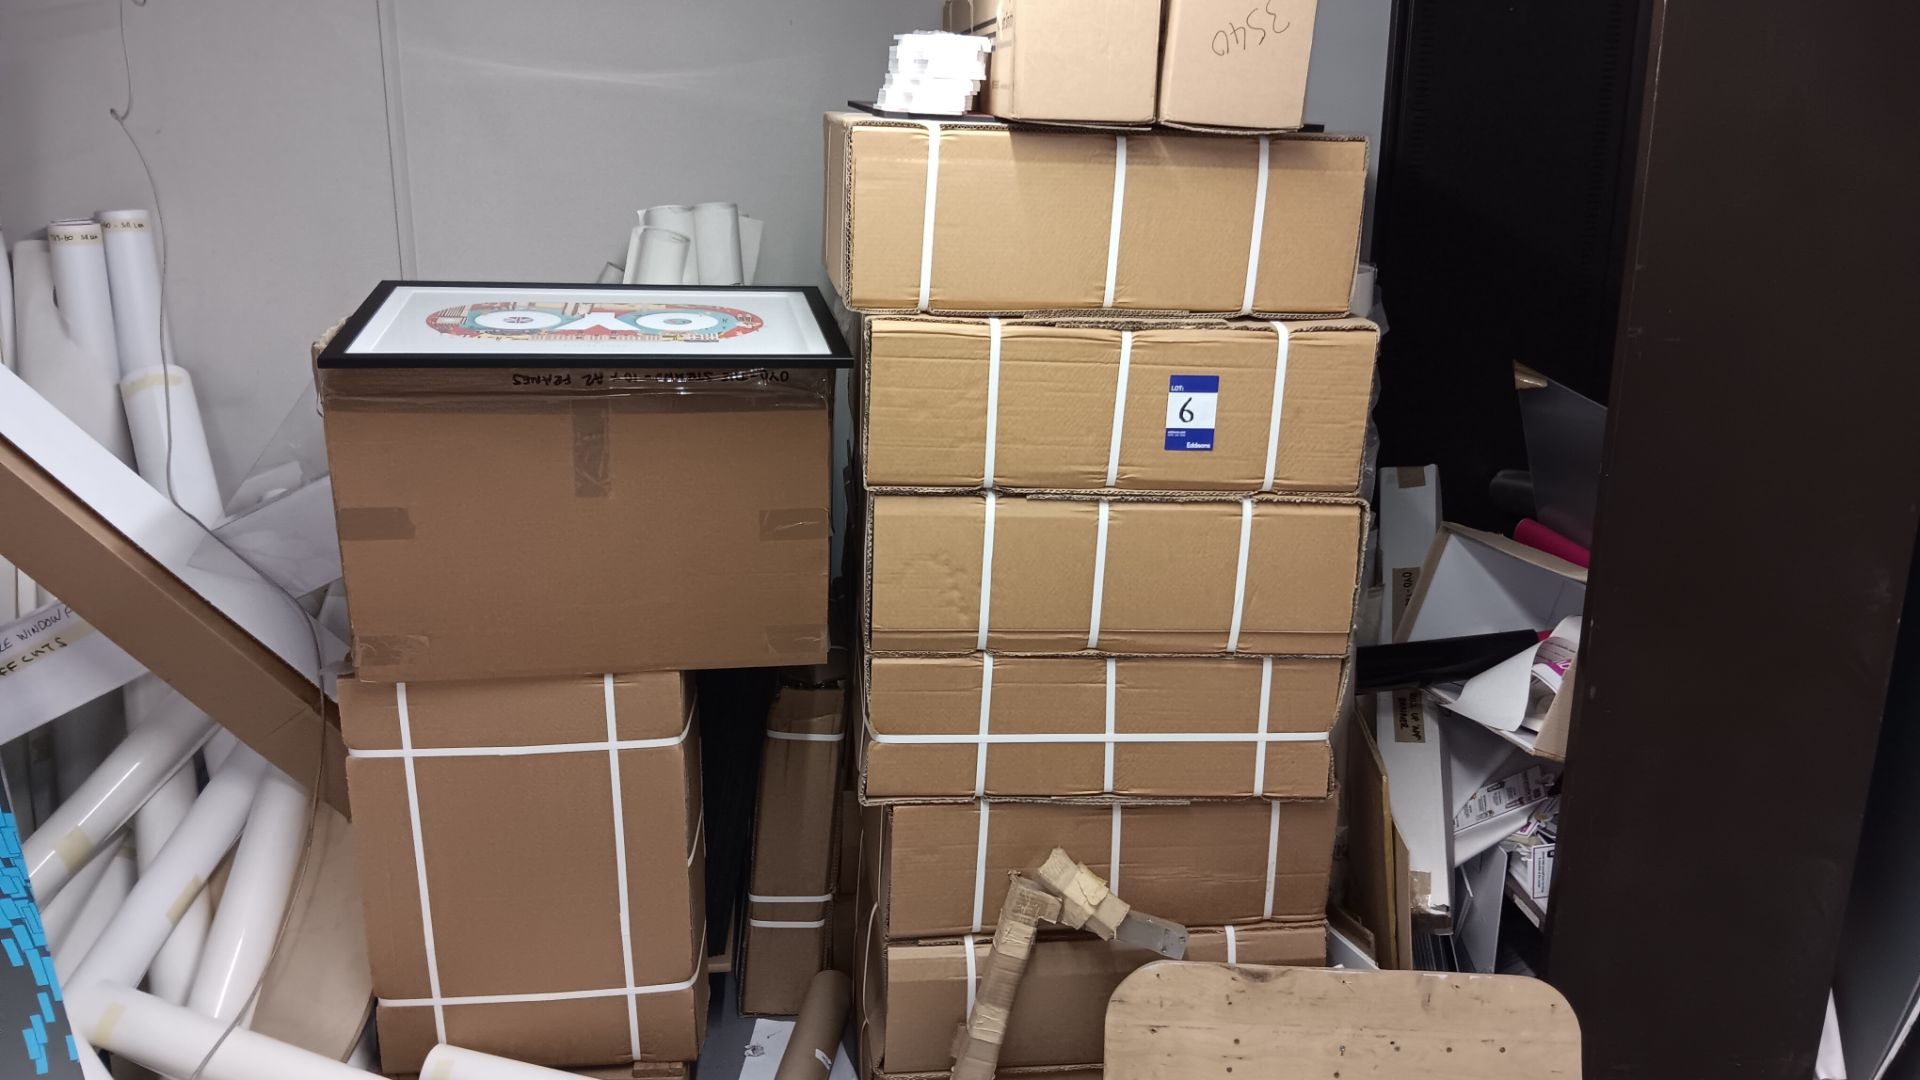 16 x boxes on A2 photo frames – Located in Unit 1 - Image 2 of 2